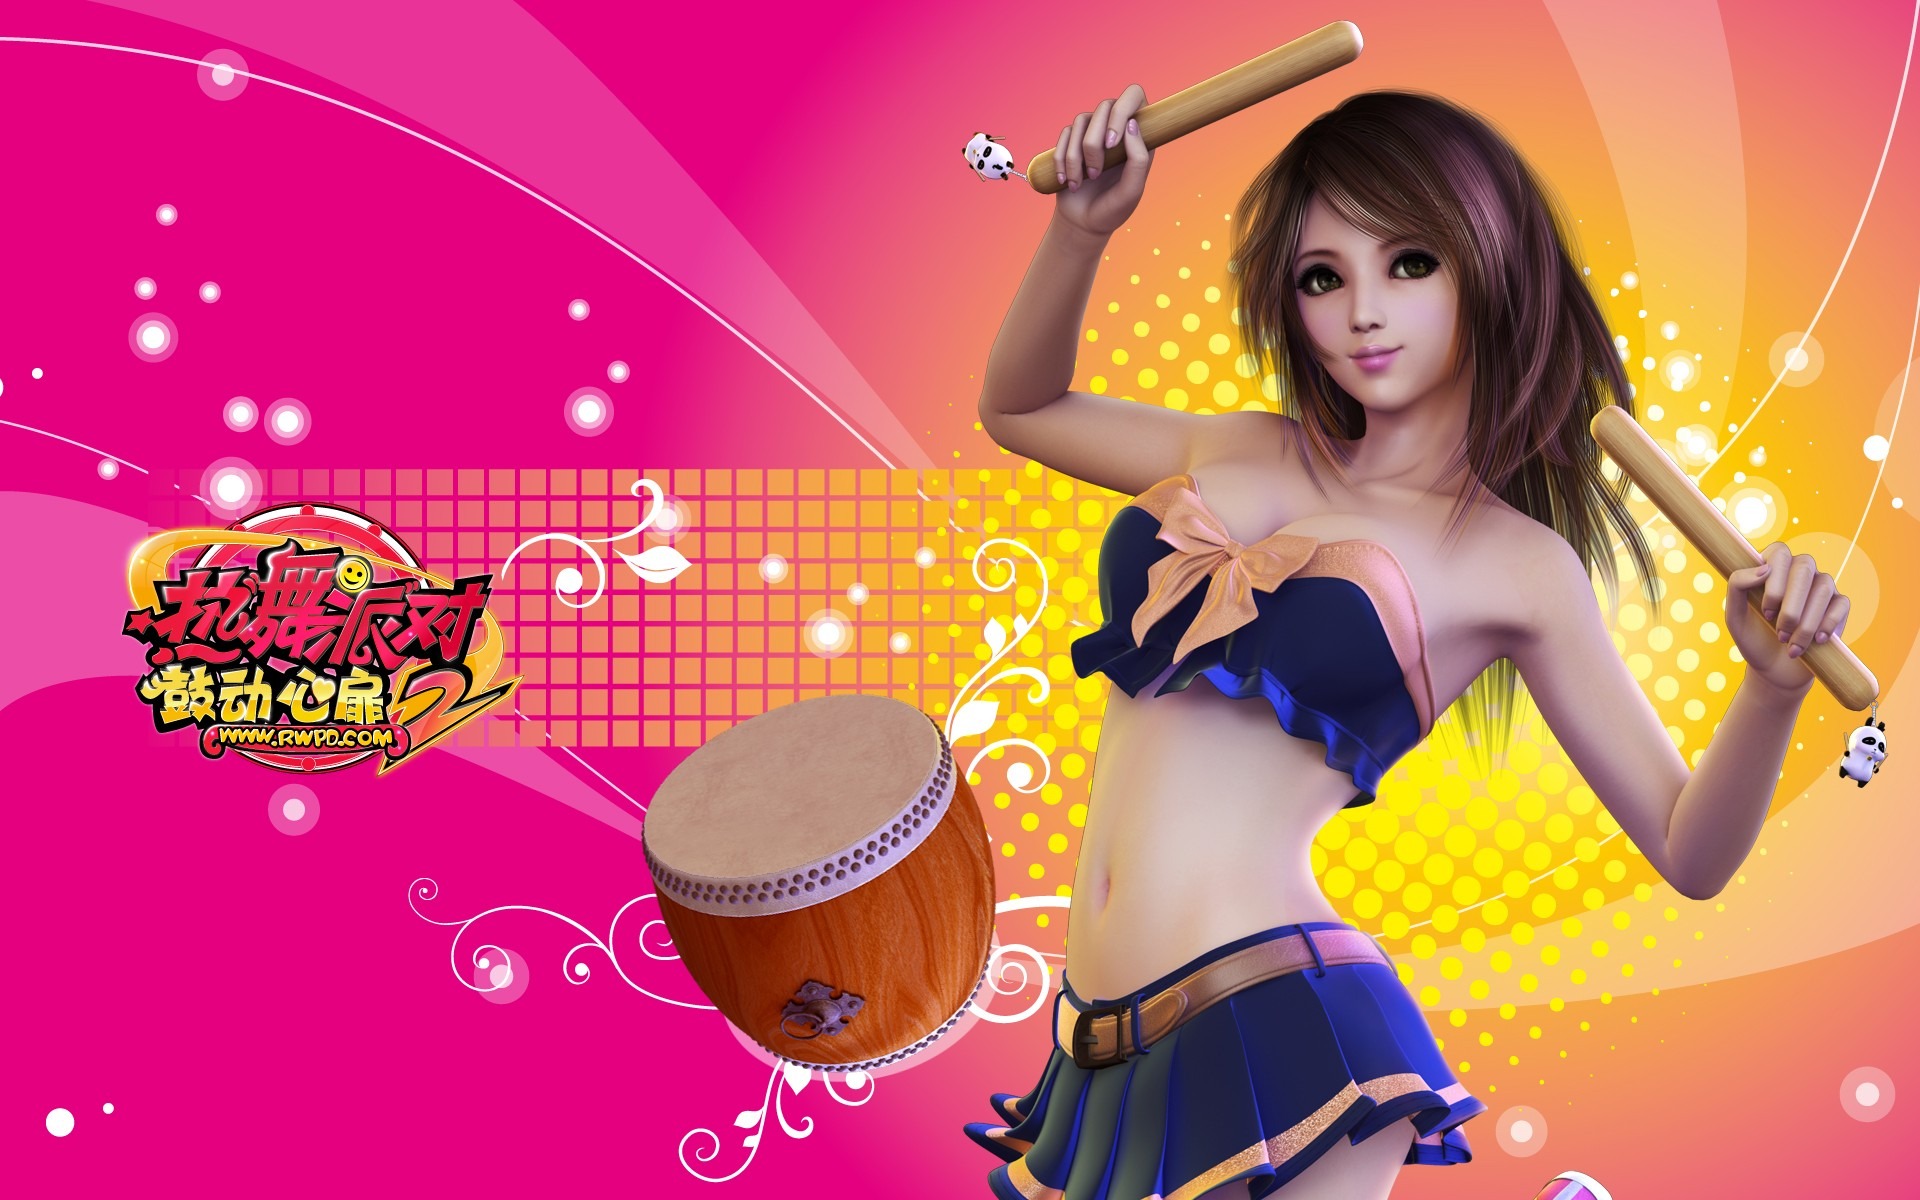 Online game Hot Dance Party II official wallpapers #22 - 1920x1200